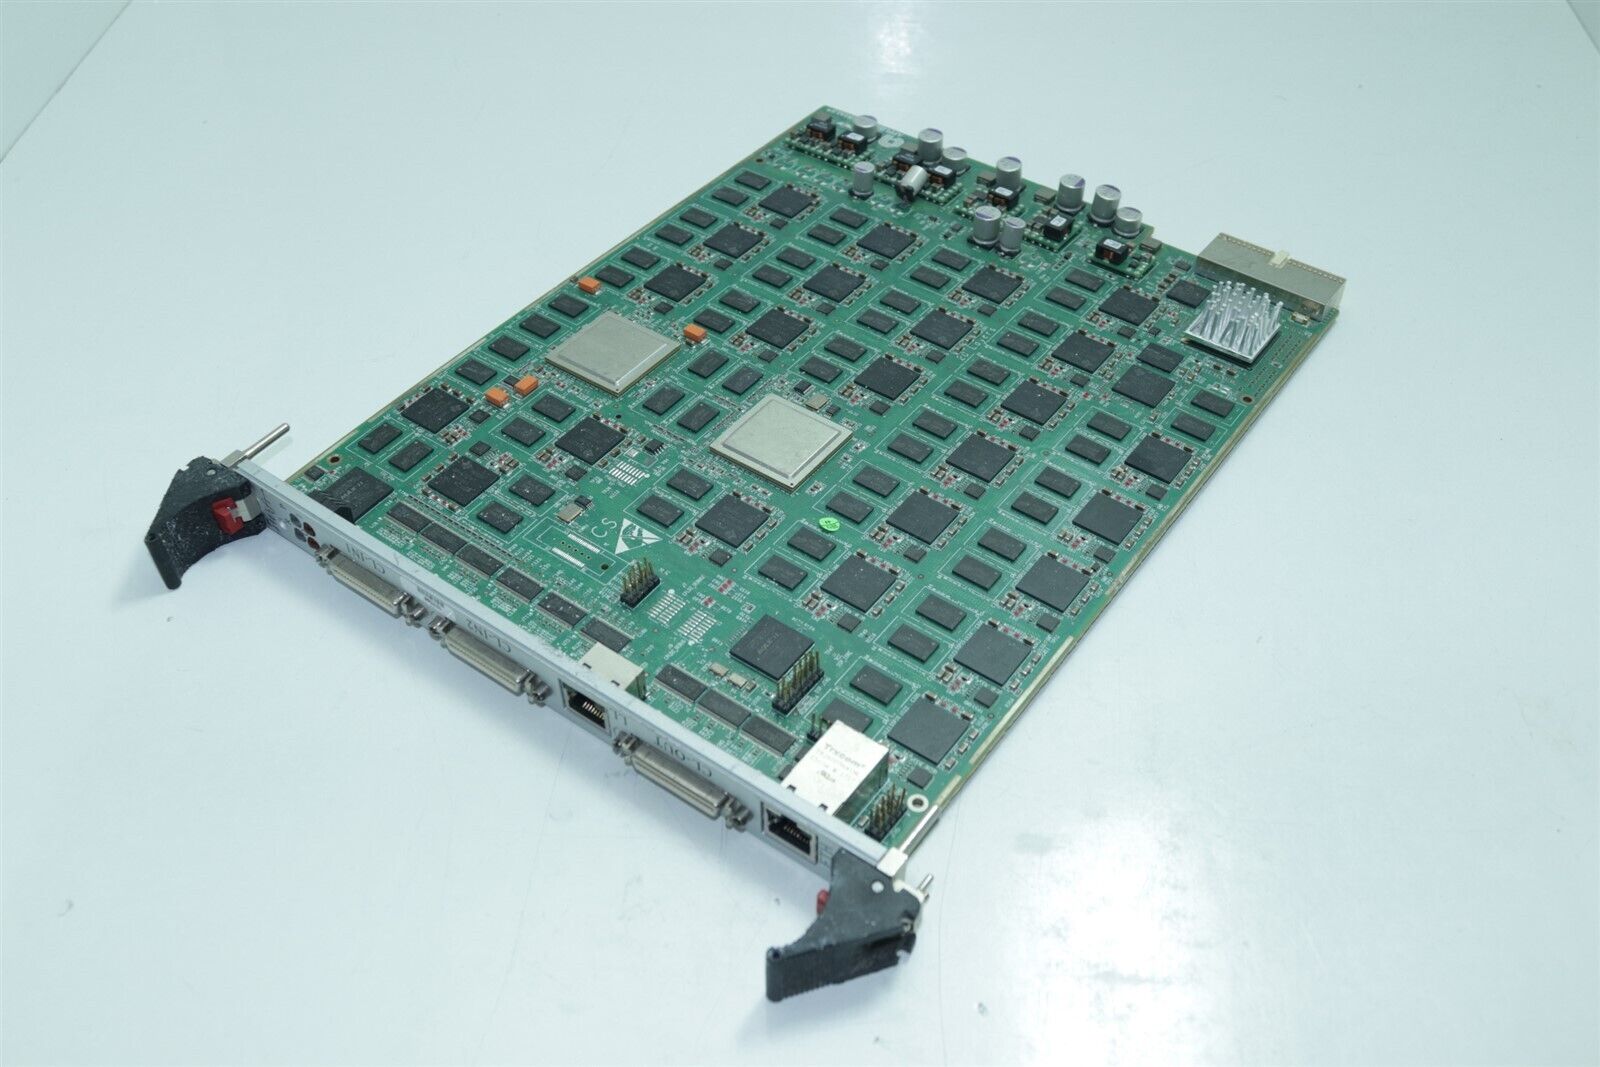 Applied Materials AMAT 0100-A55211 Swift Image Processing Board 